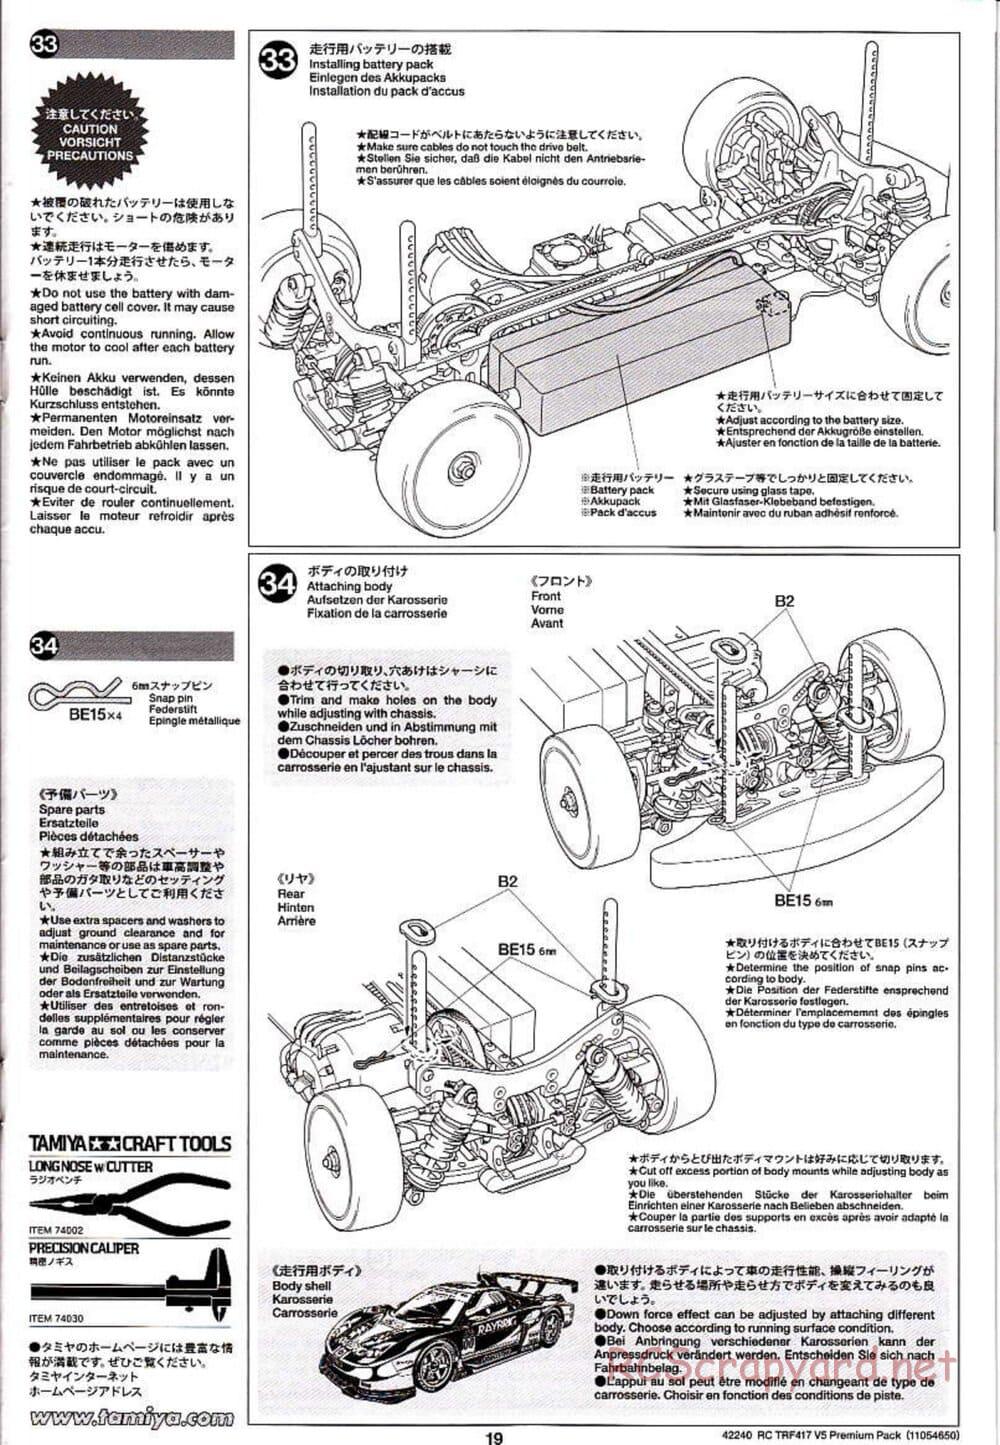 Tamiya - TRF417 V5 Premium Package Chassis - Manual - Page 19